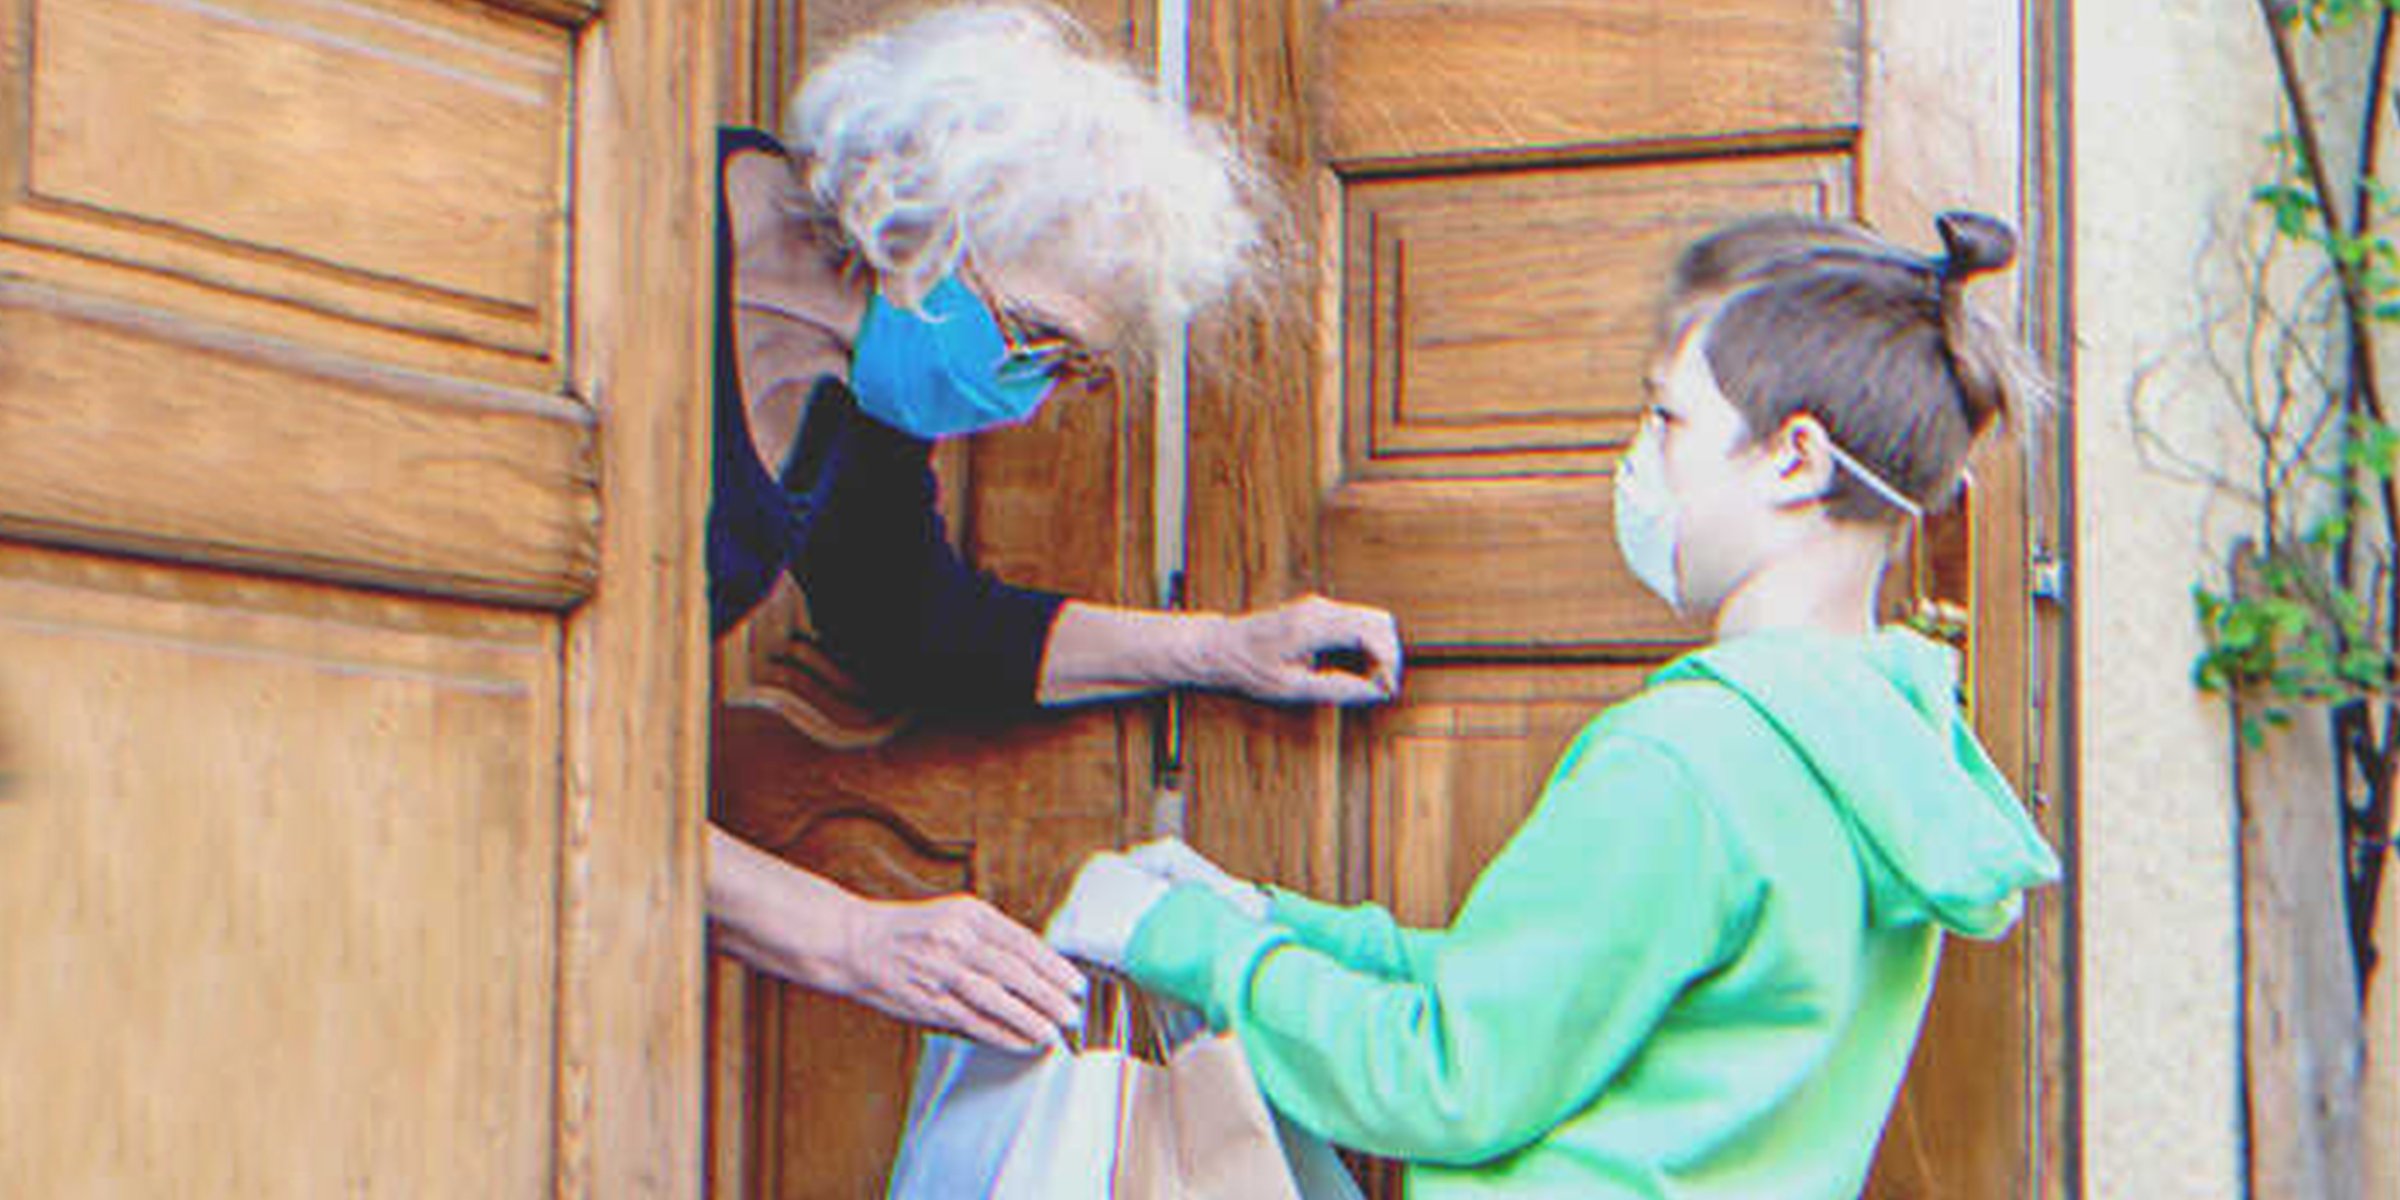 Boy delivering groceries to an old lady | Source: Shutterstock